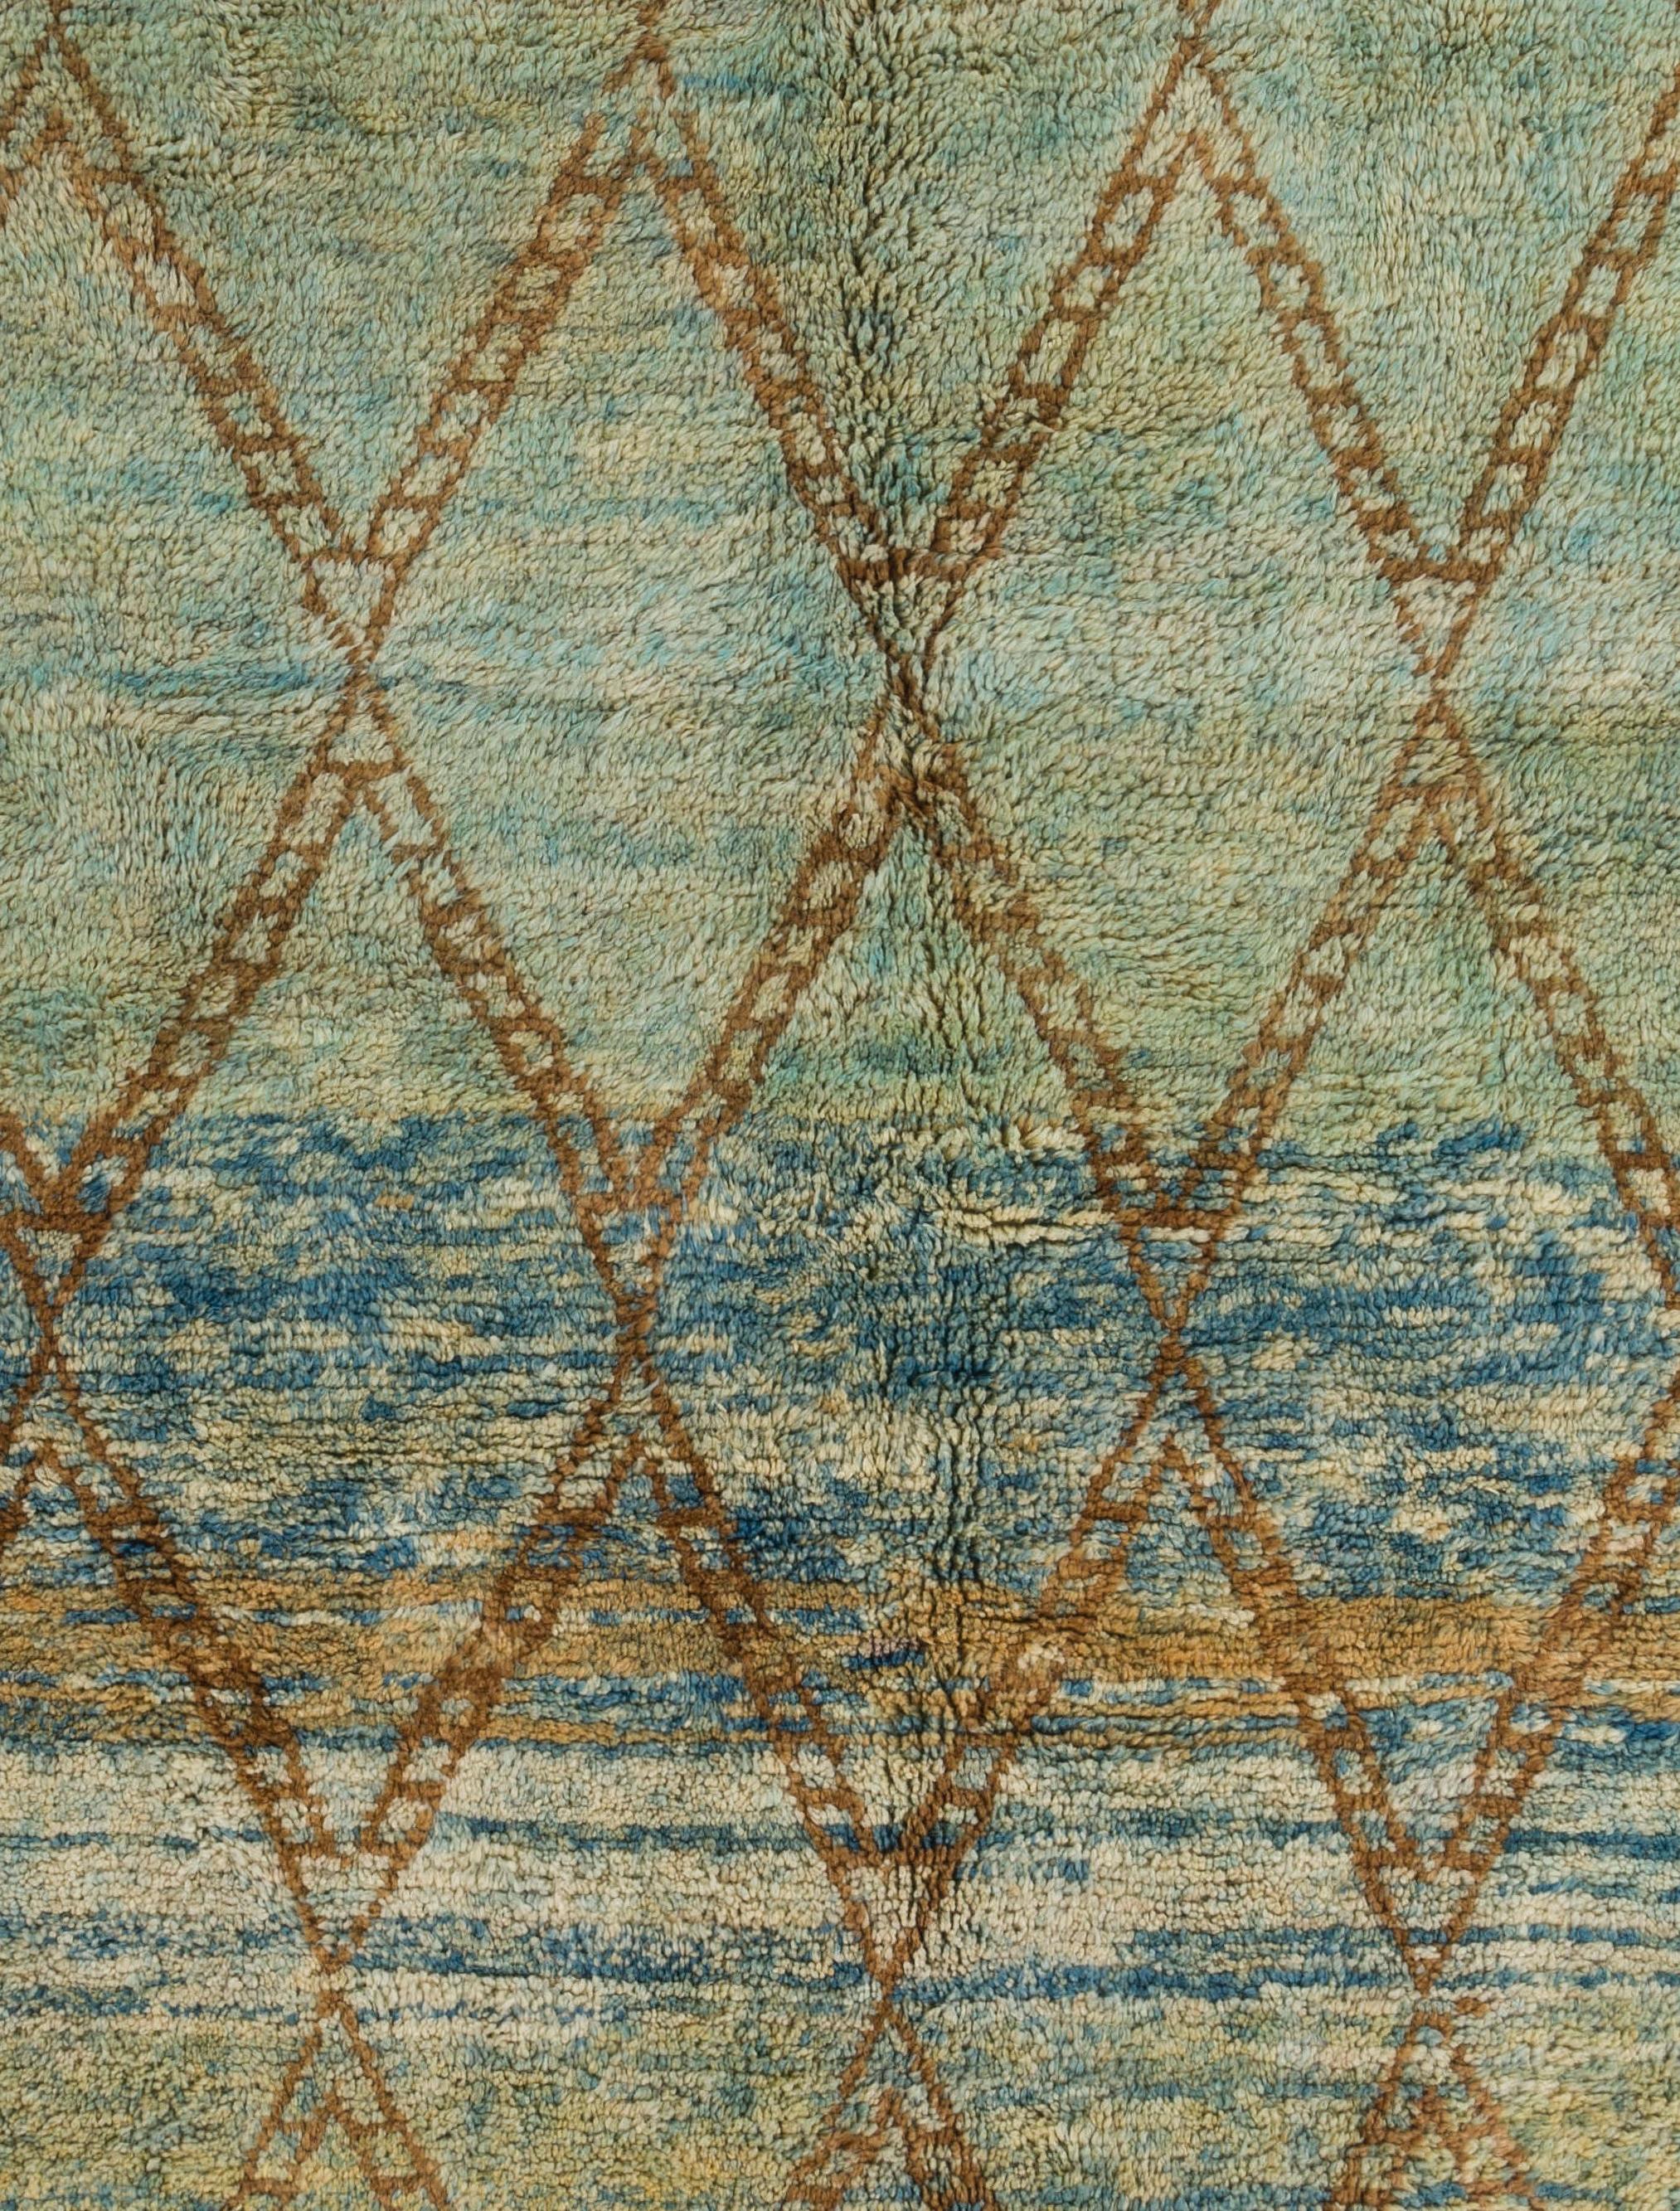 Contemporary 7x10 Ft Modern Moroccan Berber Wool Rug. Hand-knotted in Green, Blue & Brown For Sale